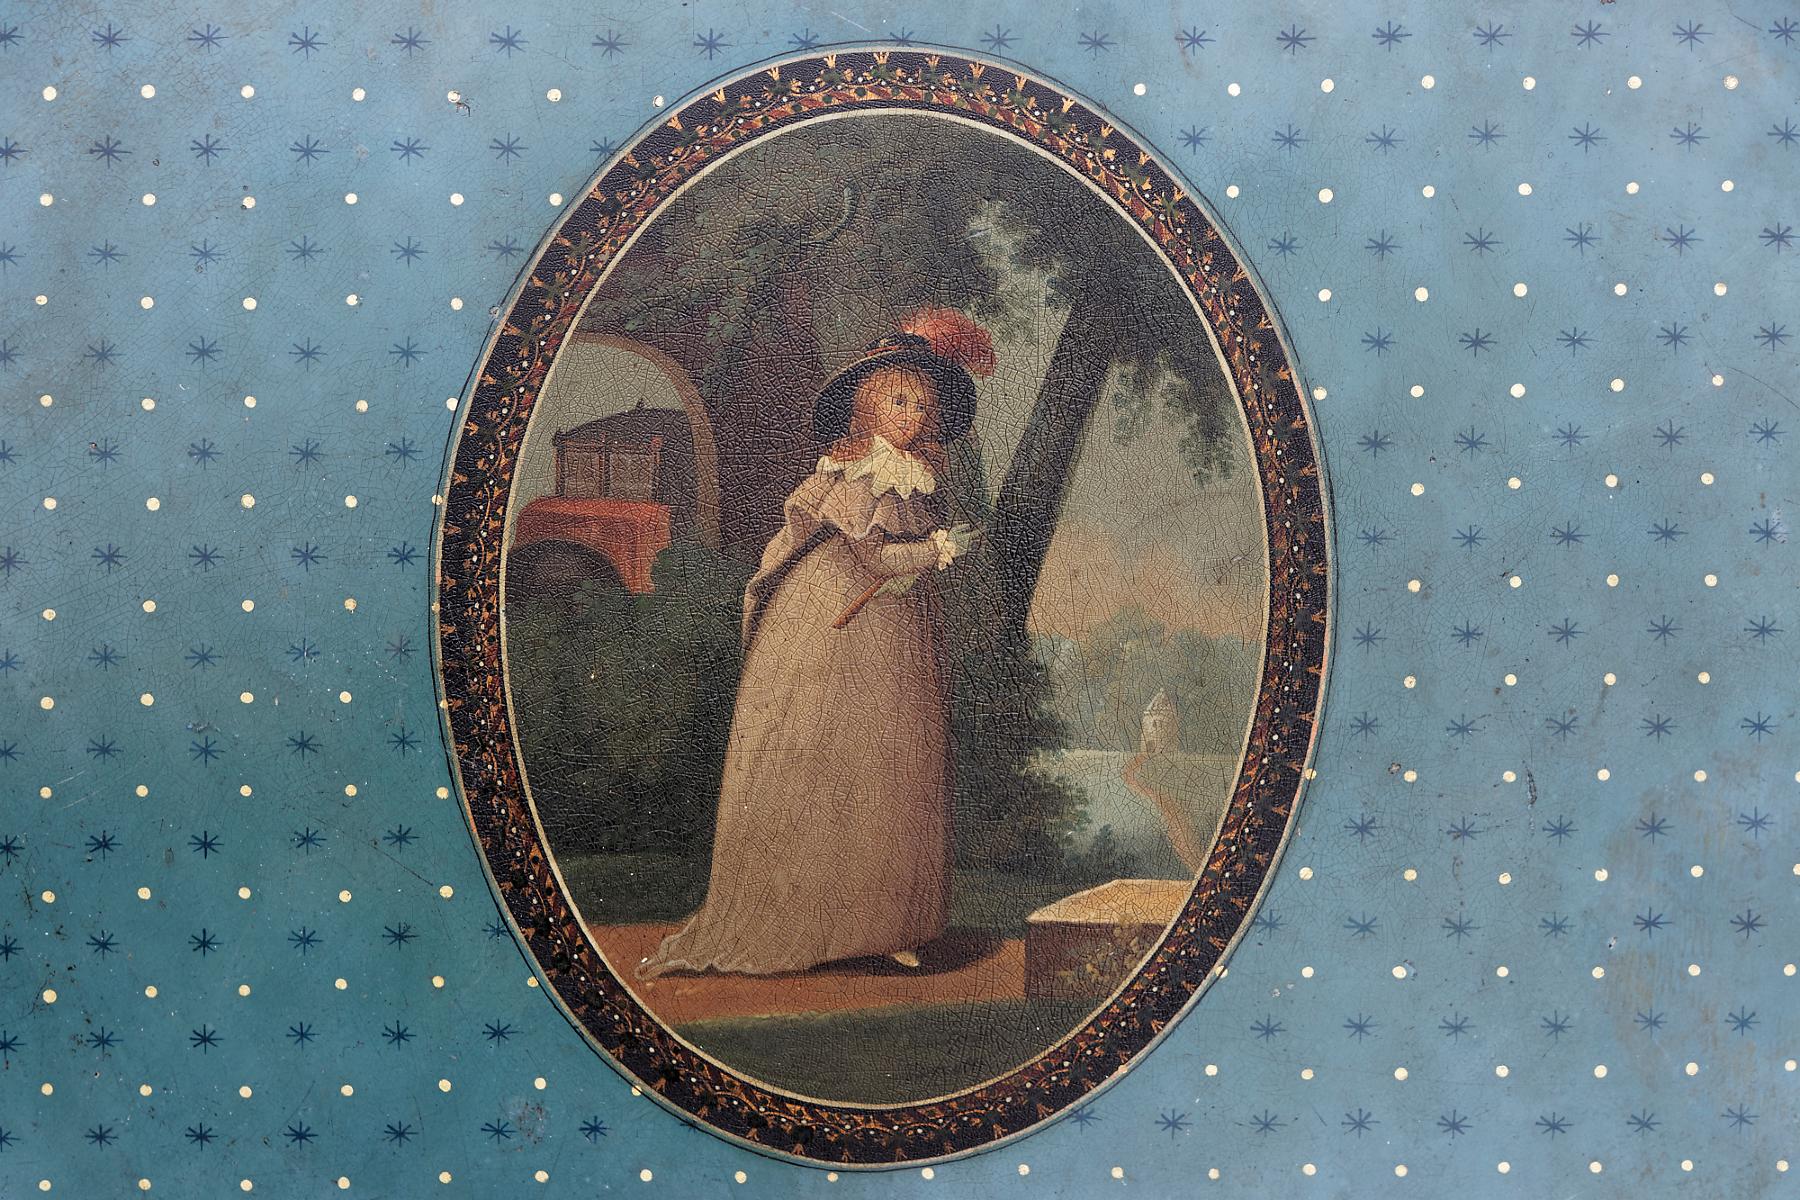 A finely painted German polychrome oval metal tray. Decorated overall with alternating stars and golden dots against a blue background, in the centre an upright oval with an elegantly dressed young girl wearing gloves and a hat within a classical